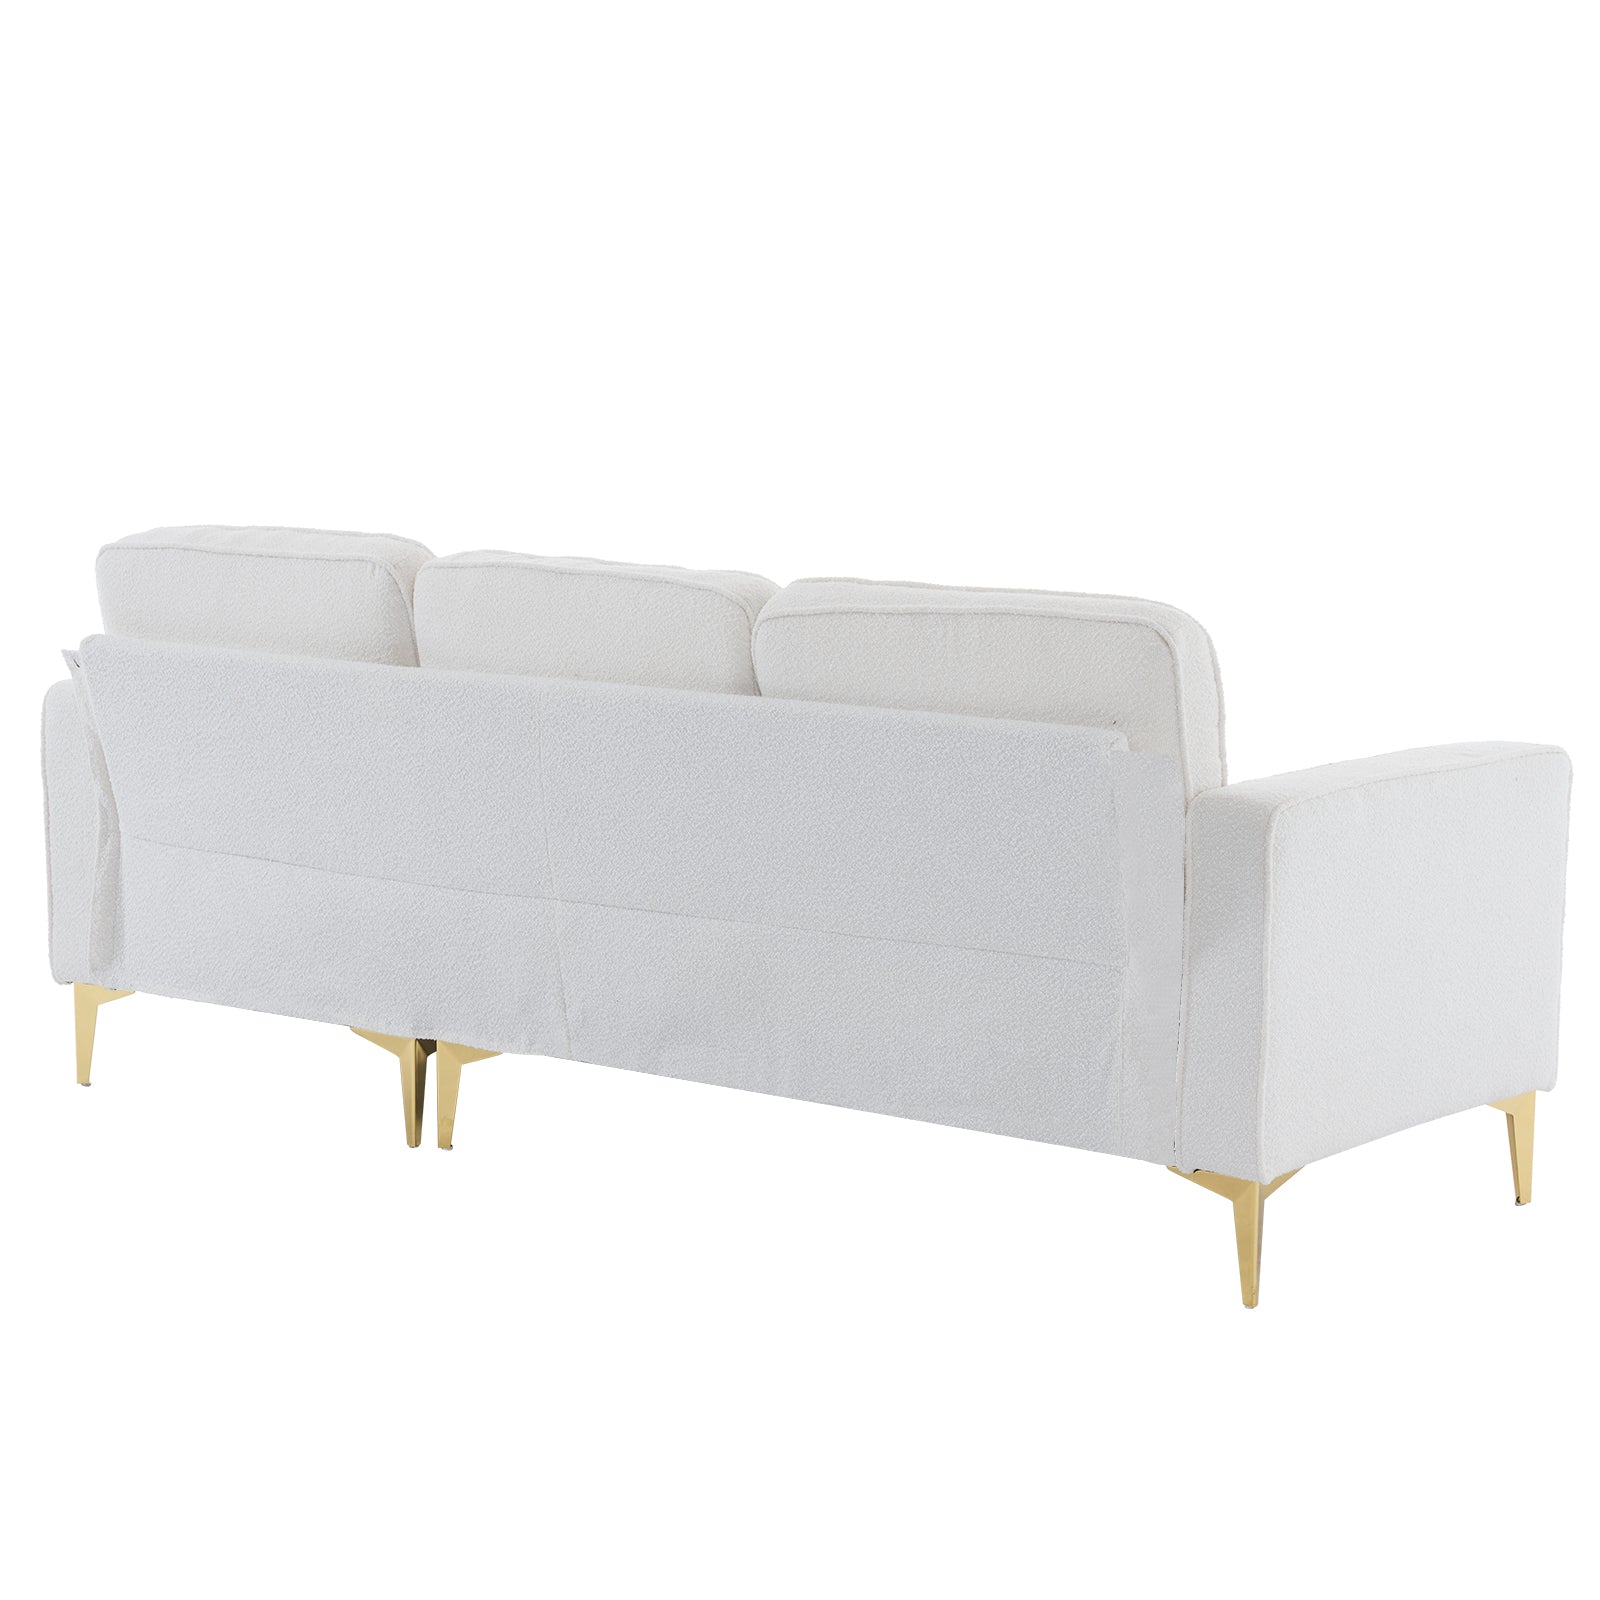 Owen 85.8" Beige Boucle Sectional Sofa with Gold Finish Metal Legs